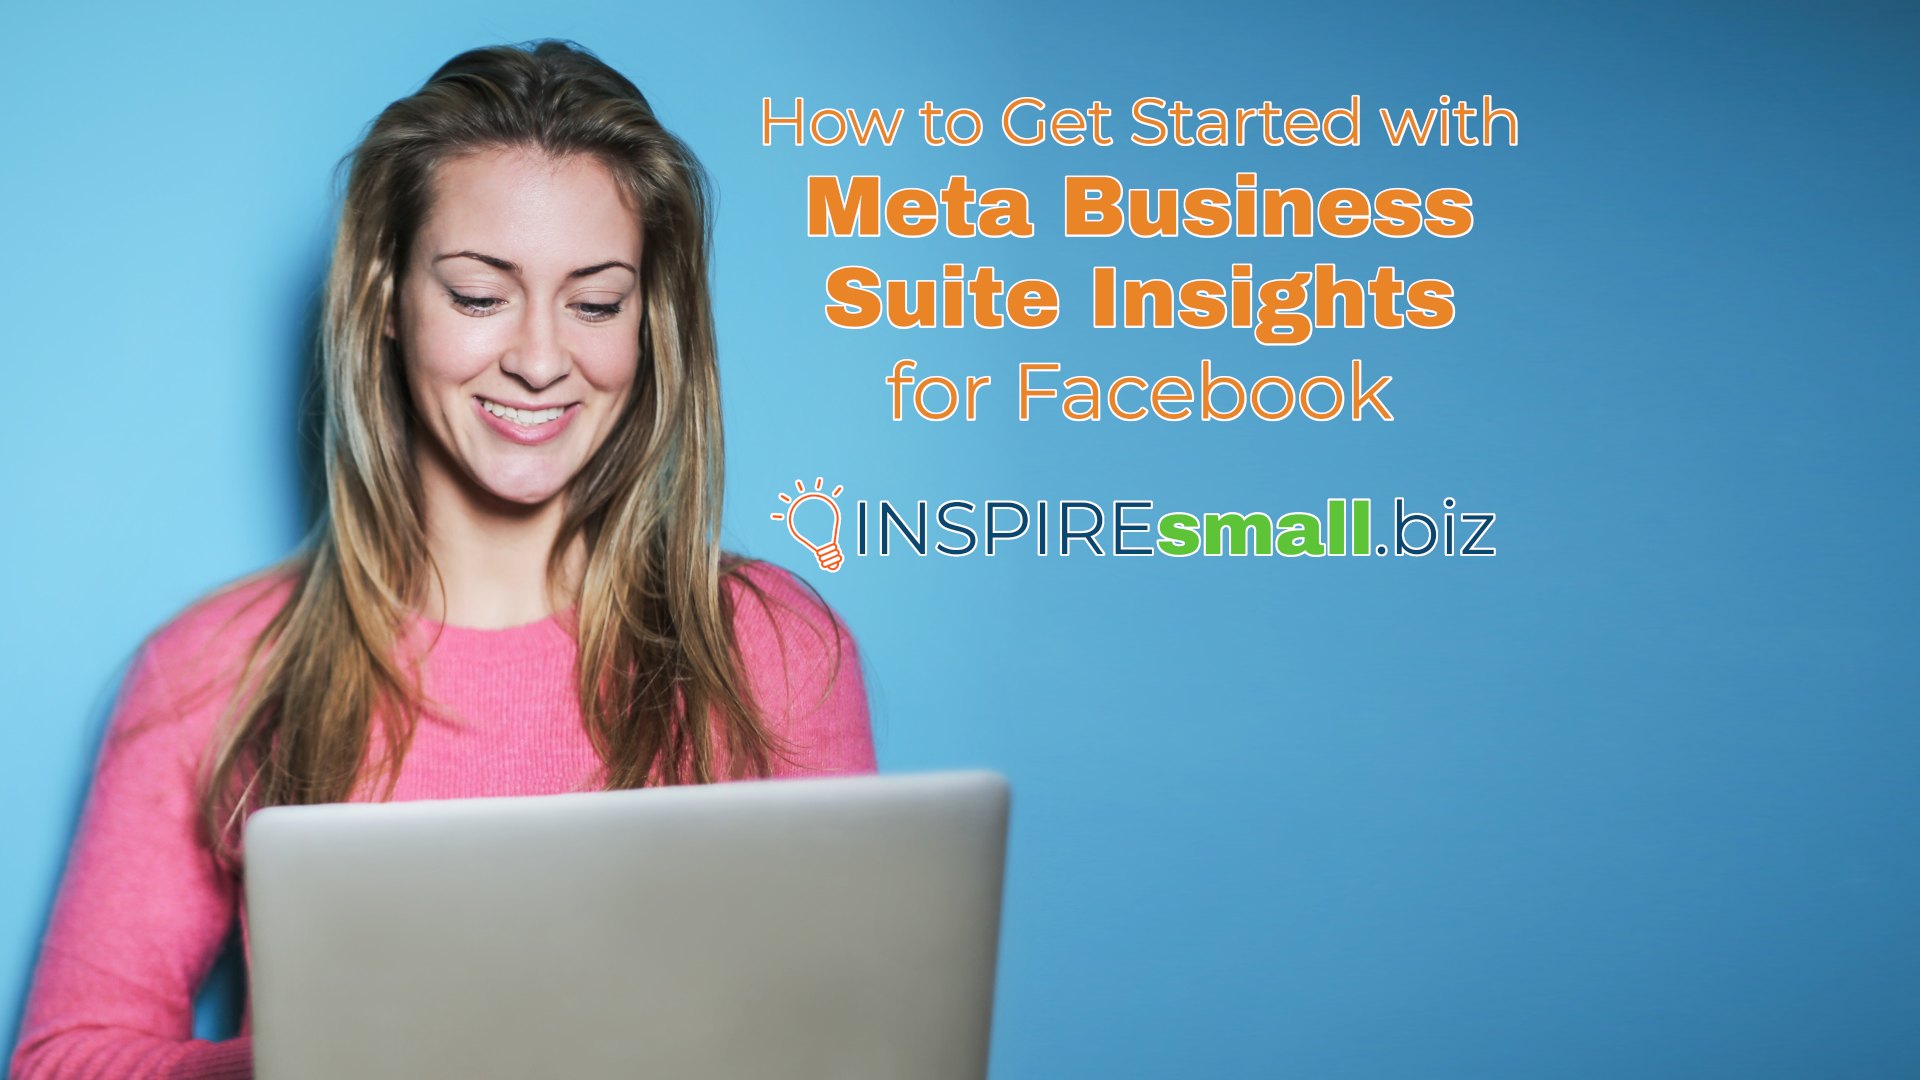 How to Get Started with Meta Business Suite Insights for Facebook